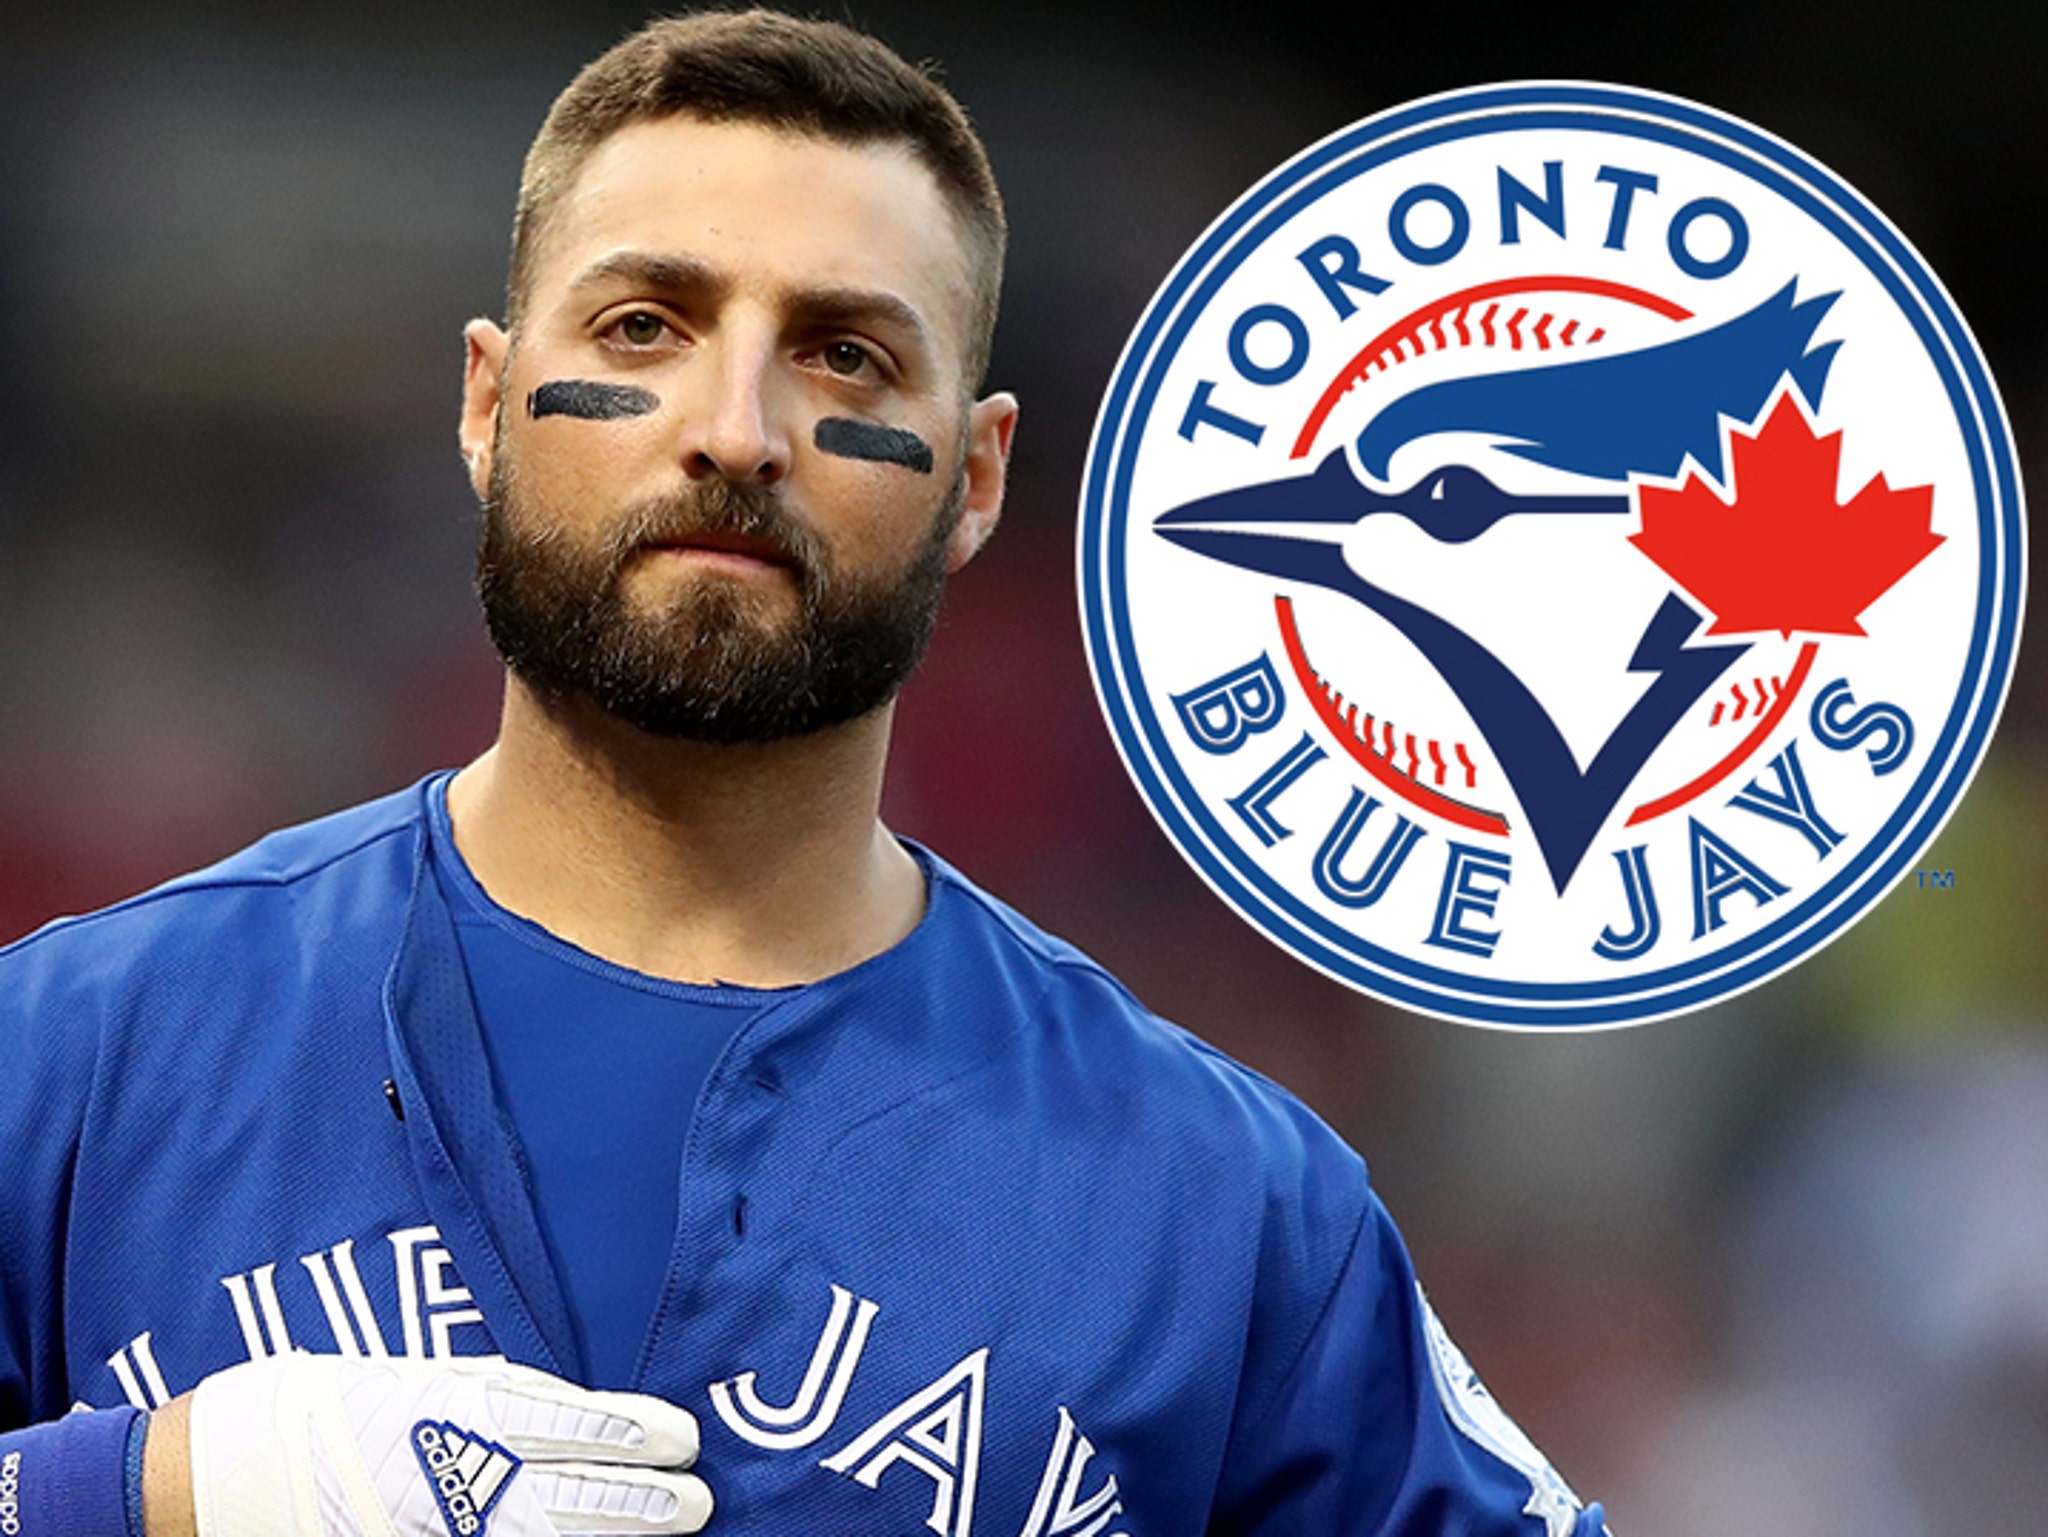 Kevin Pillar suspended by Toronto Blue Jays for use of homophobic